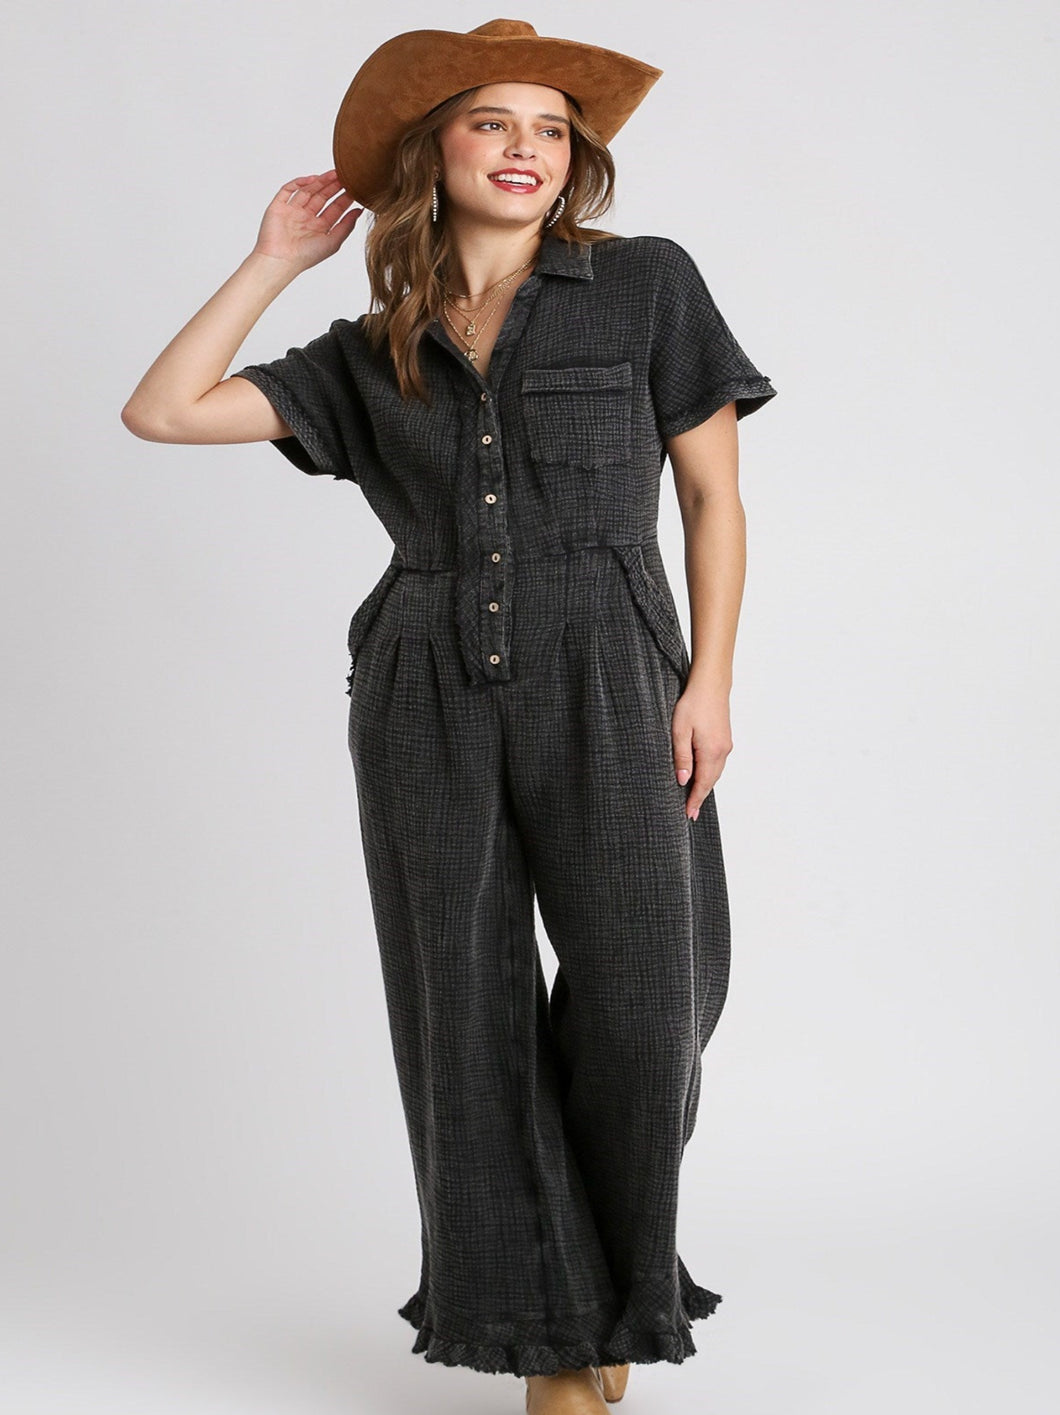 On The Road Again Jumpsuit